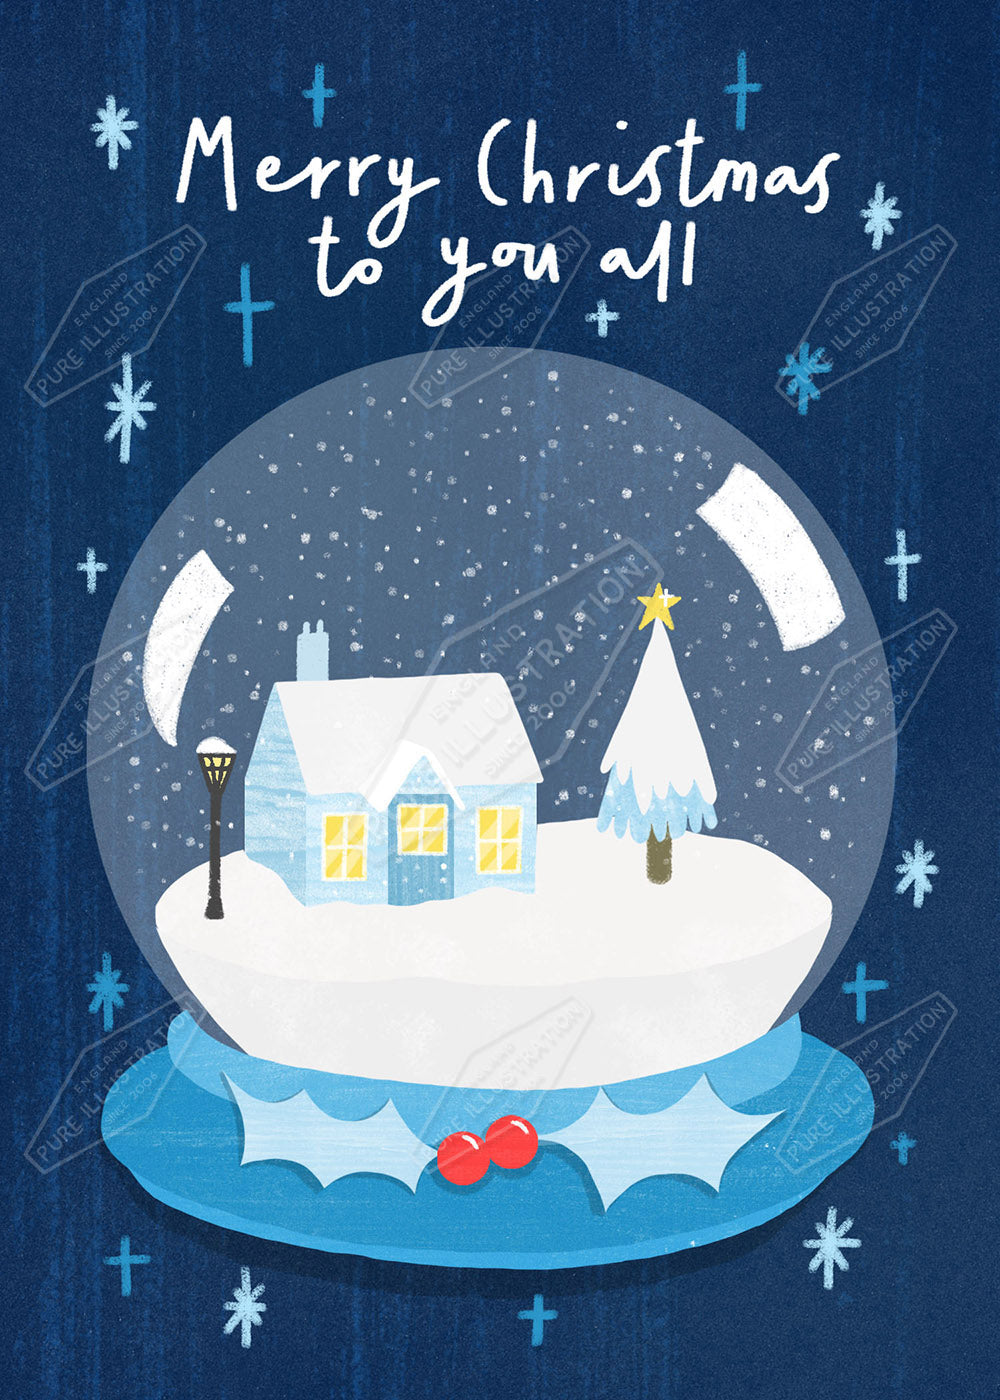 Christmas Snow Globe Greeting Card Design - by Leah Brideaux - Pure Art Licensing Agency & Surface Design Studio